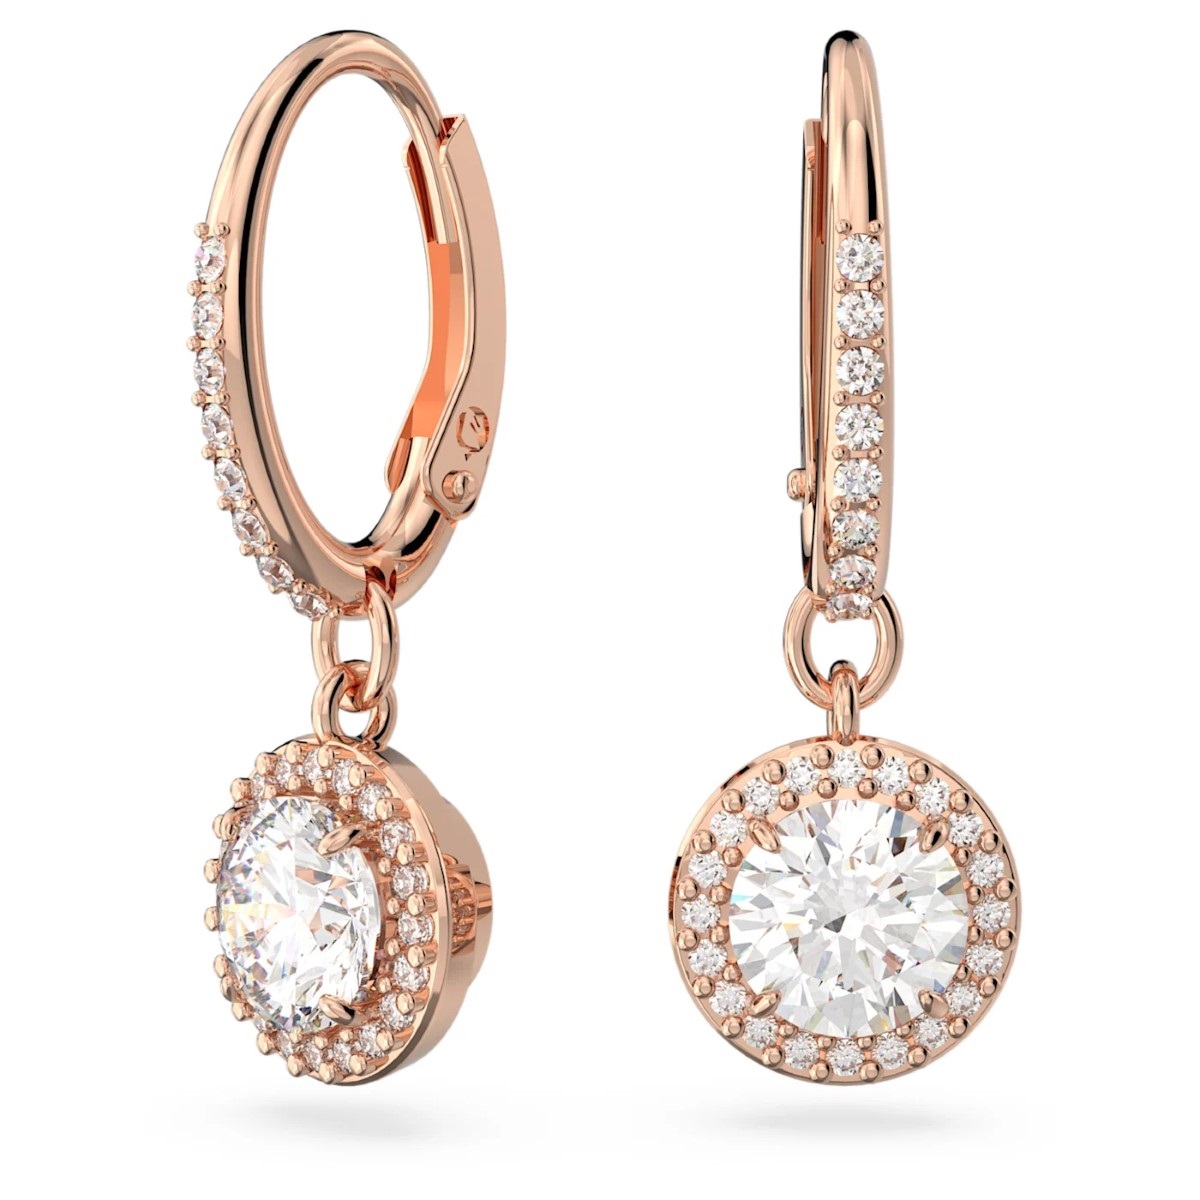 Photos - Earrings Swarovski Constella Halo Drop  - White with Rose Gold Plating 